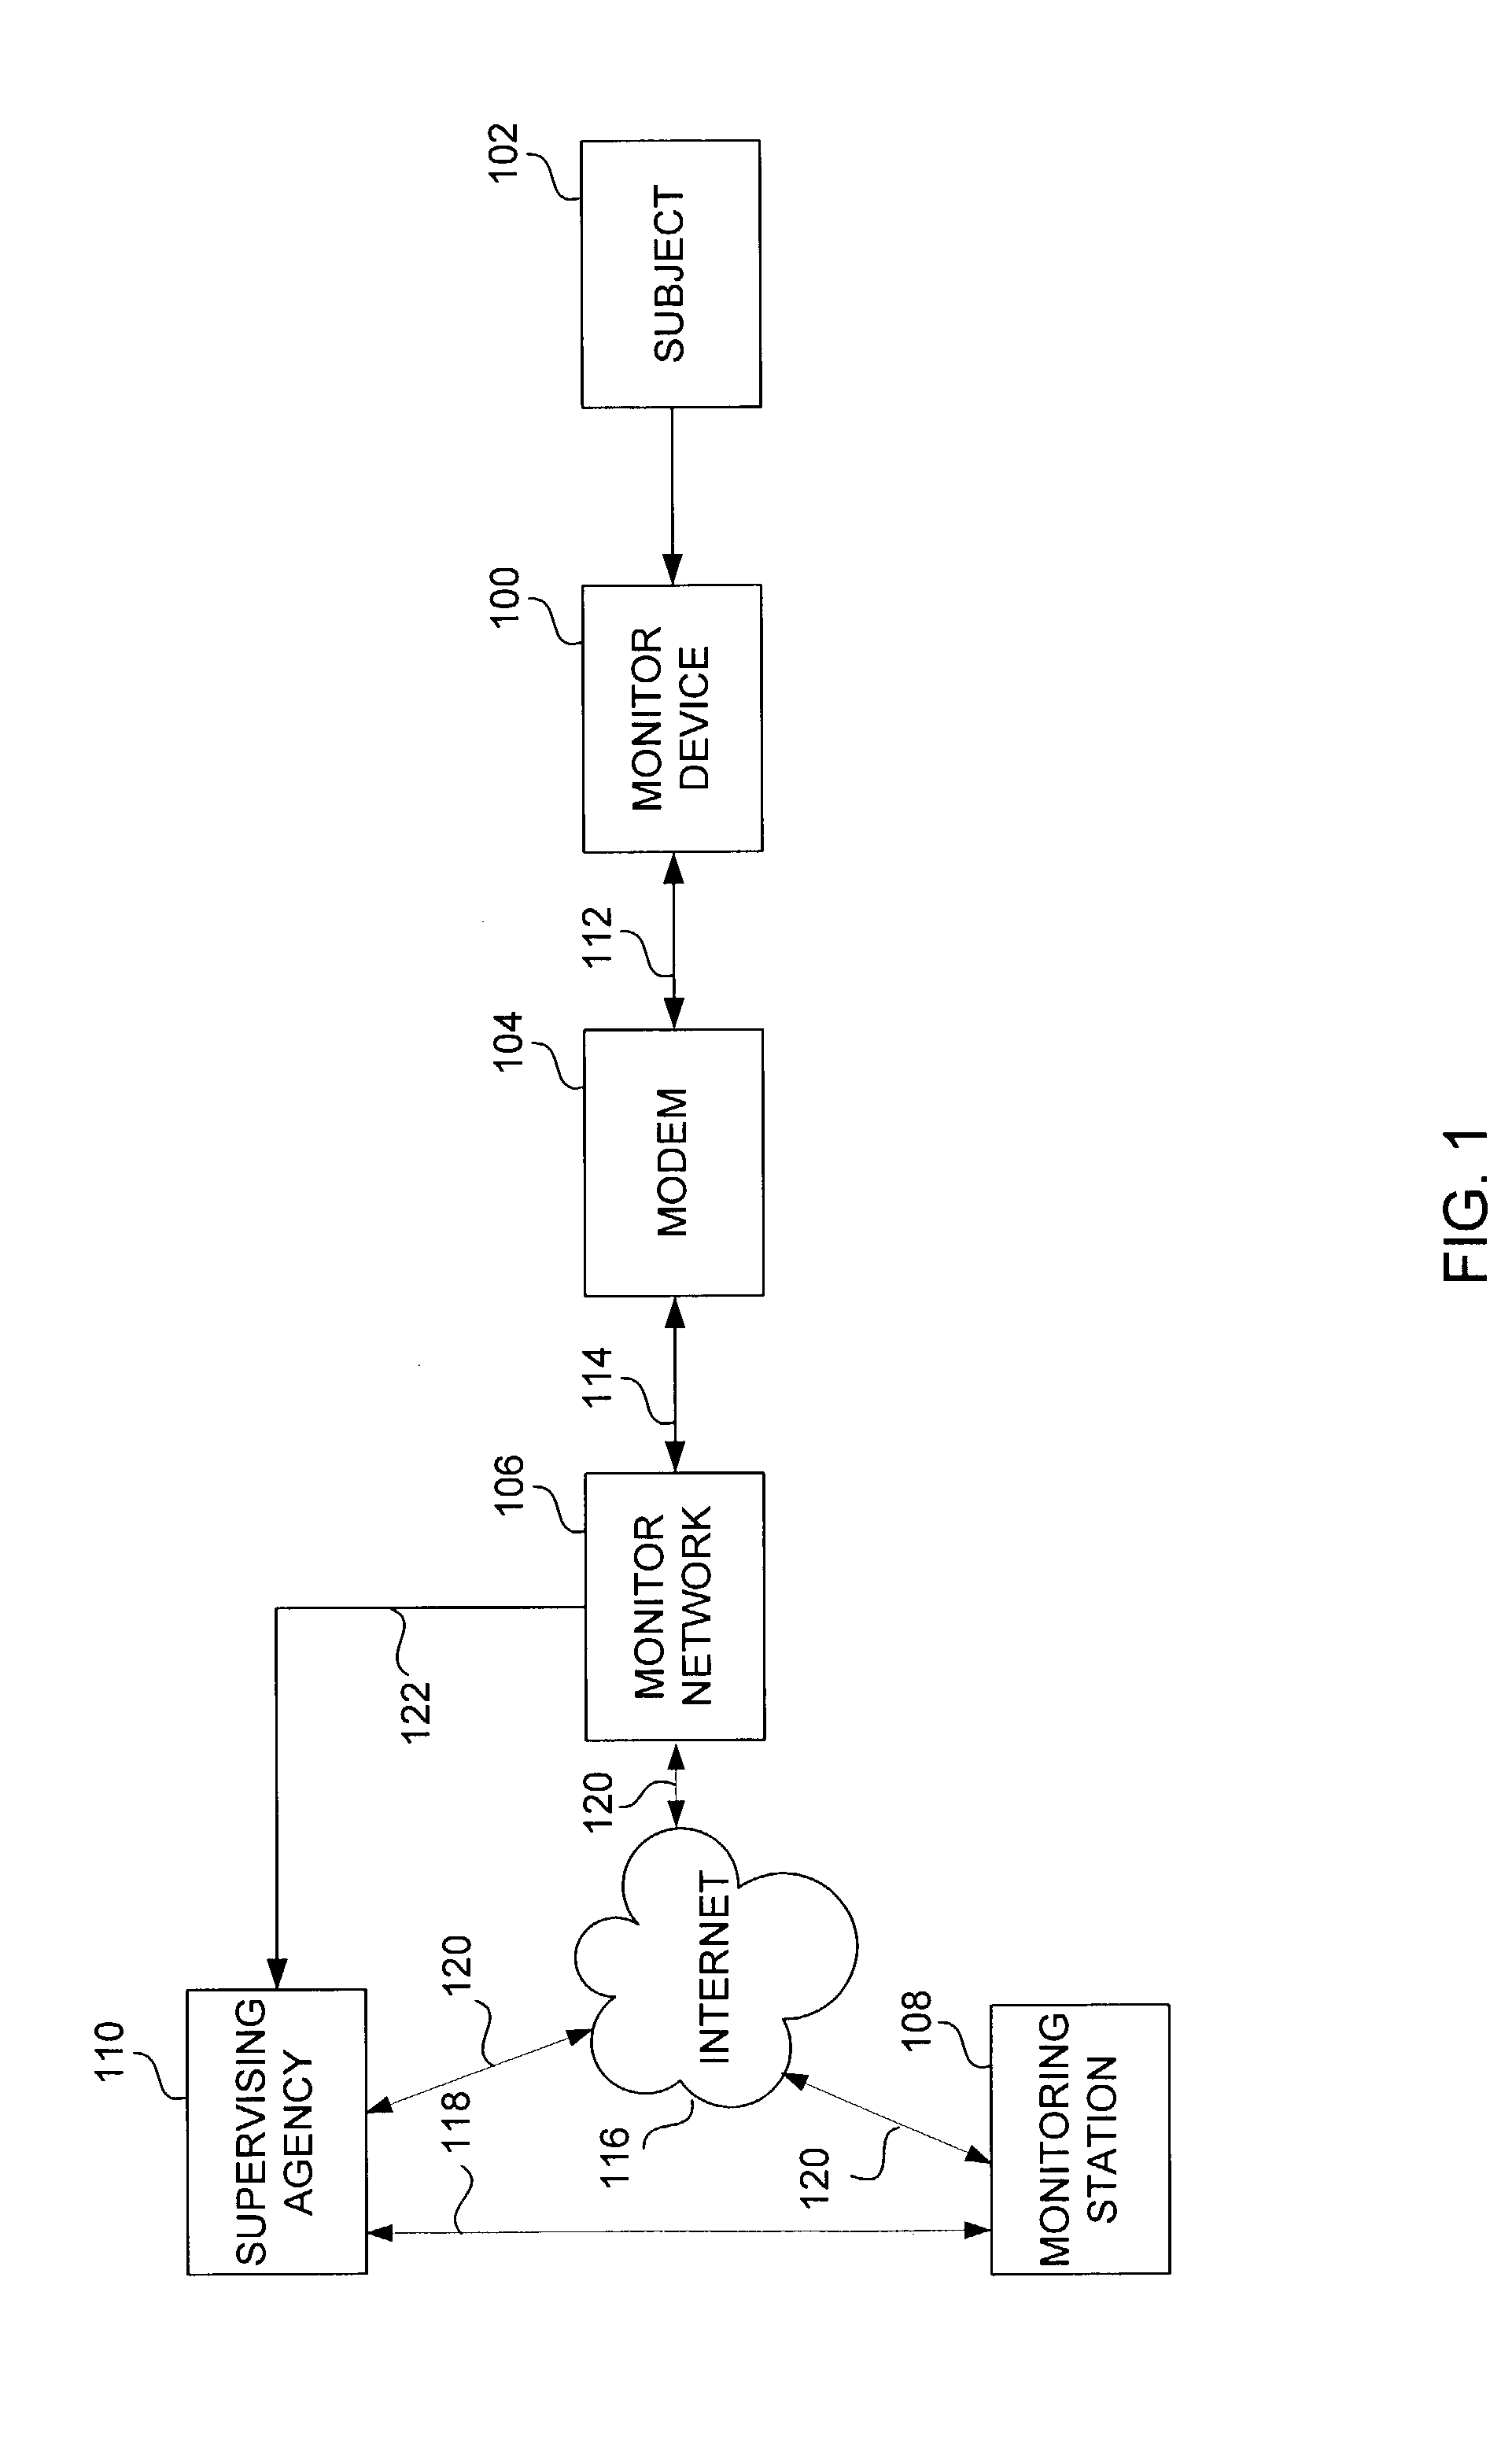 Method and apparatus for remote blood alcohol monitoring